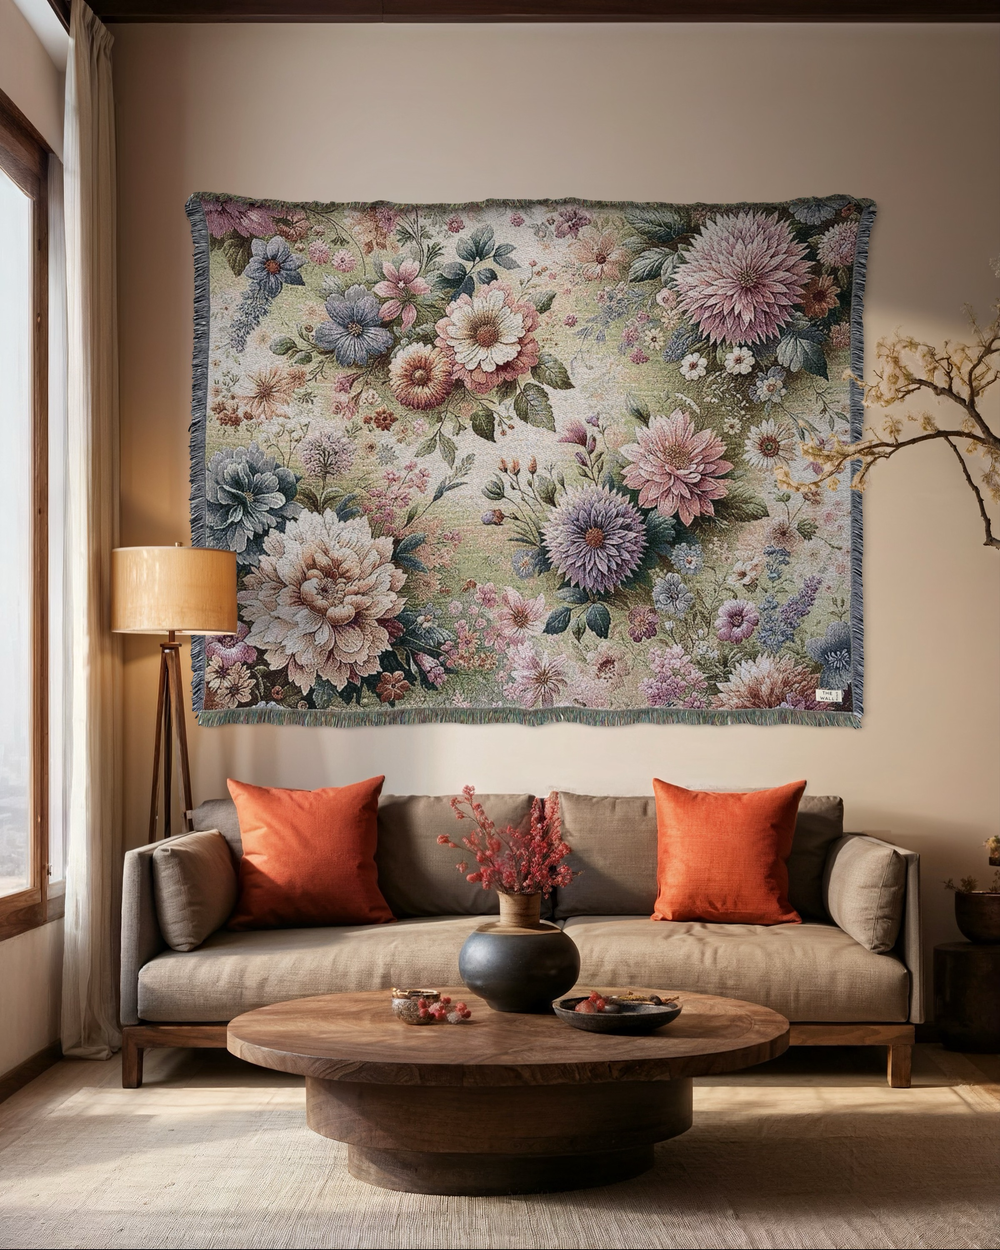 A Wall Rugs with flowers